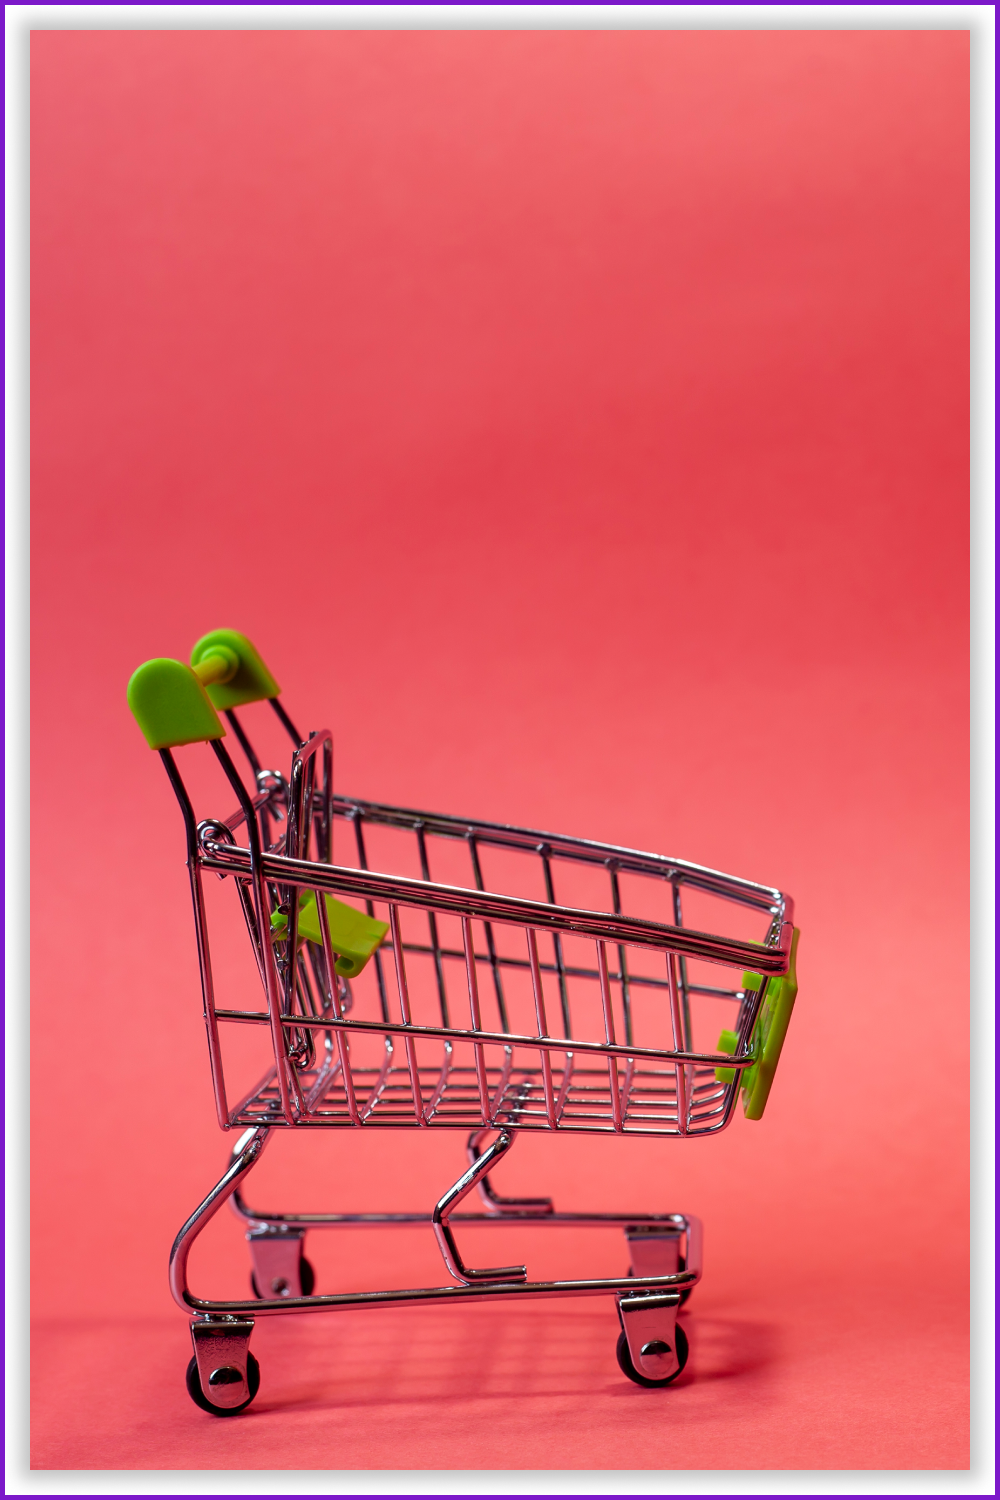 A toy little green shopping cart on a pink background.